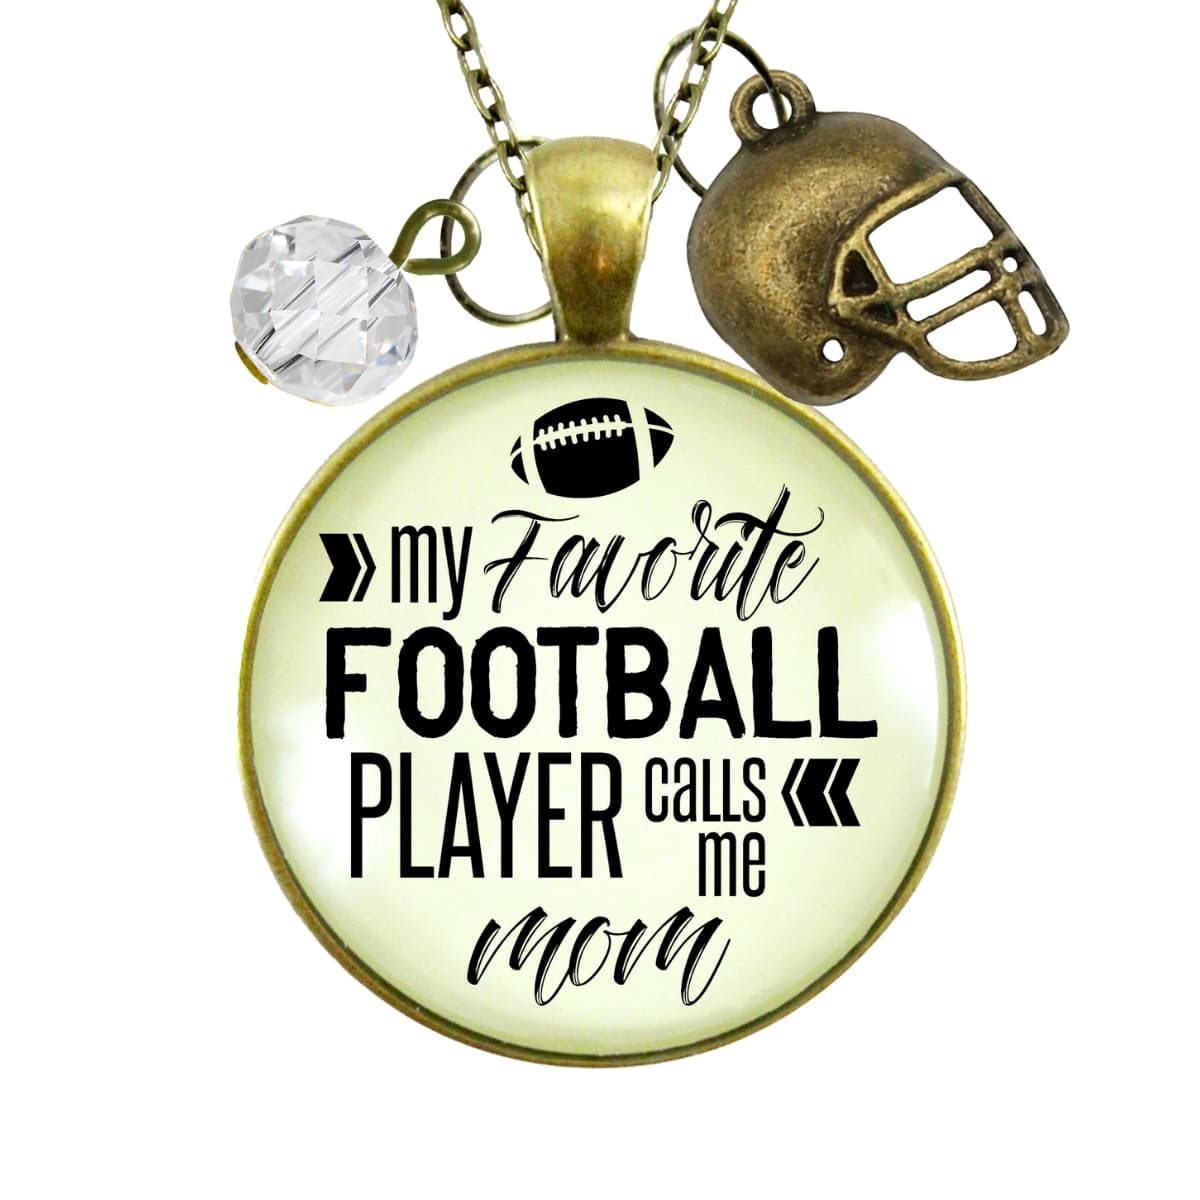 Football Mom Necklace Favorite Football Player Sports Mother Jewelry Clear Bead  Necklace - Gutsy Goodness Handmade Jewelry